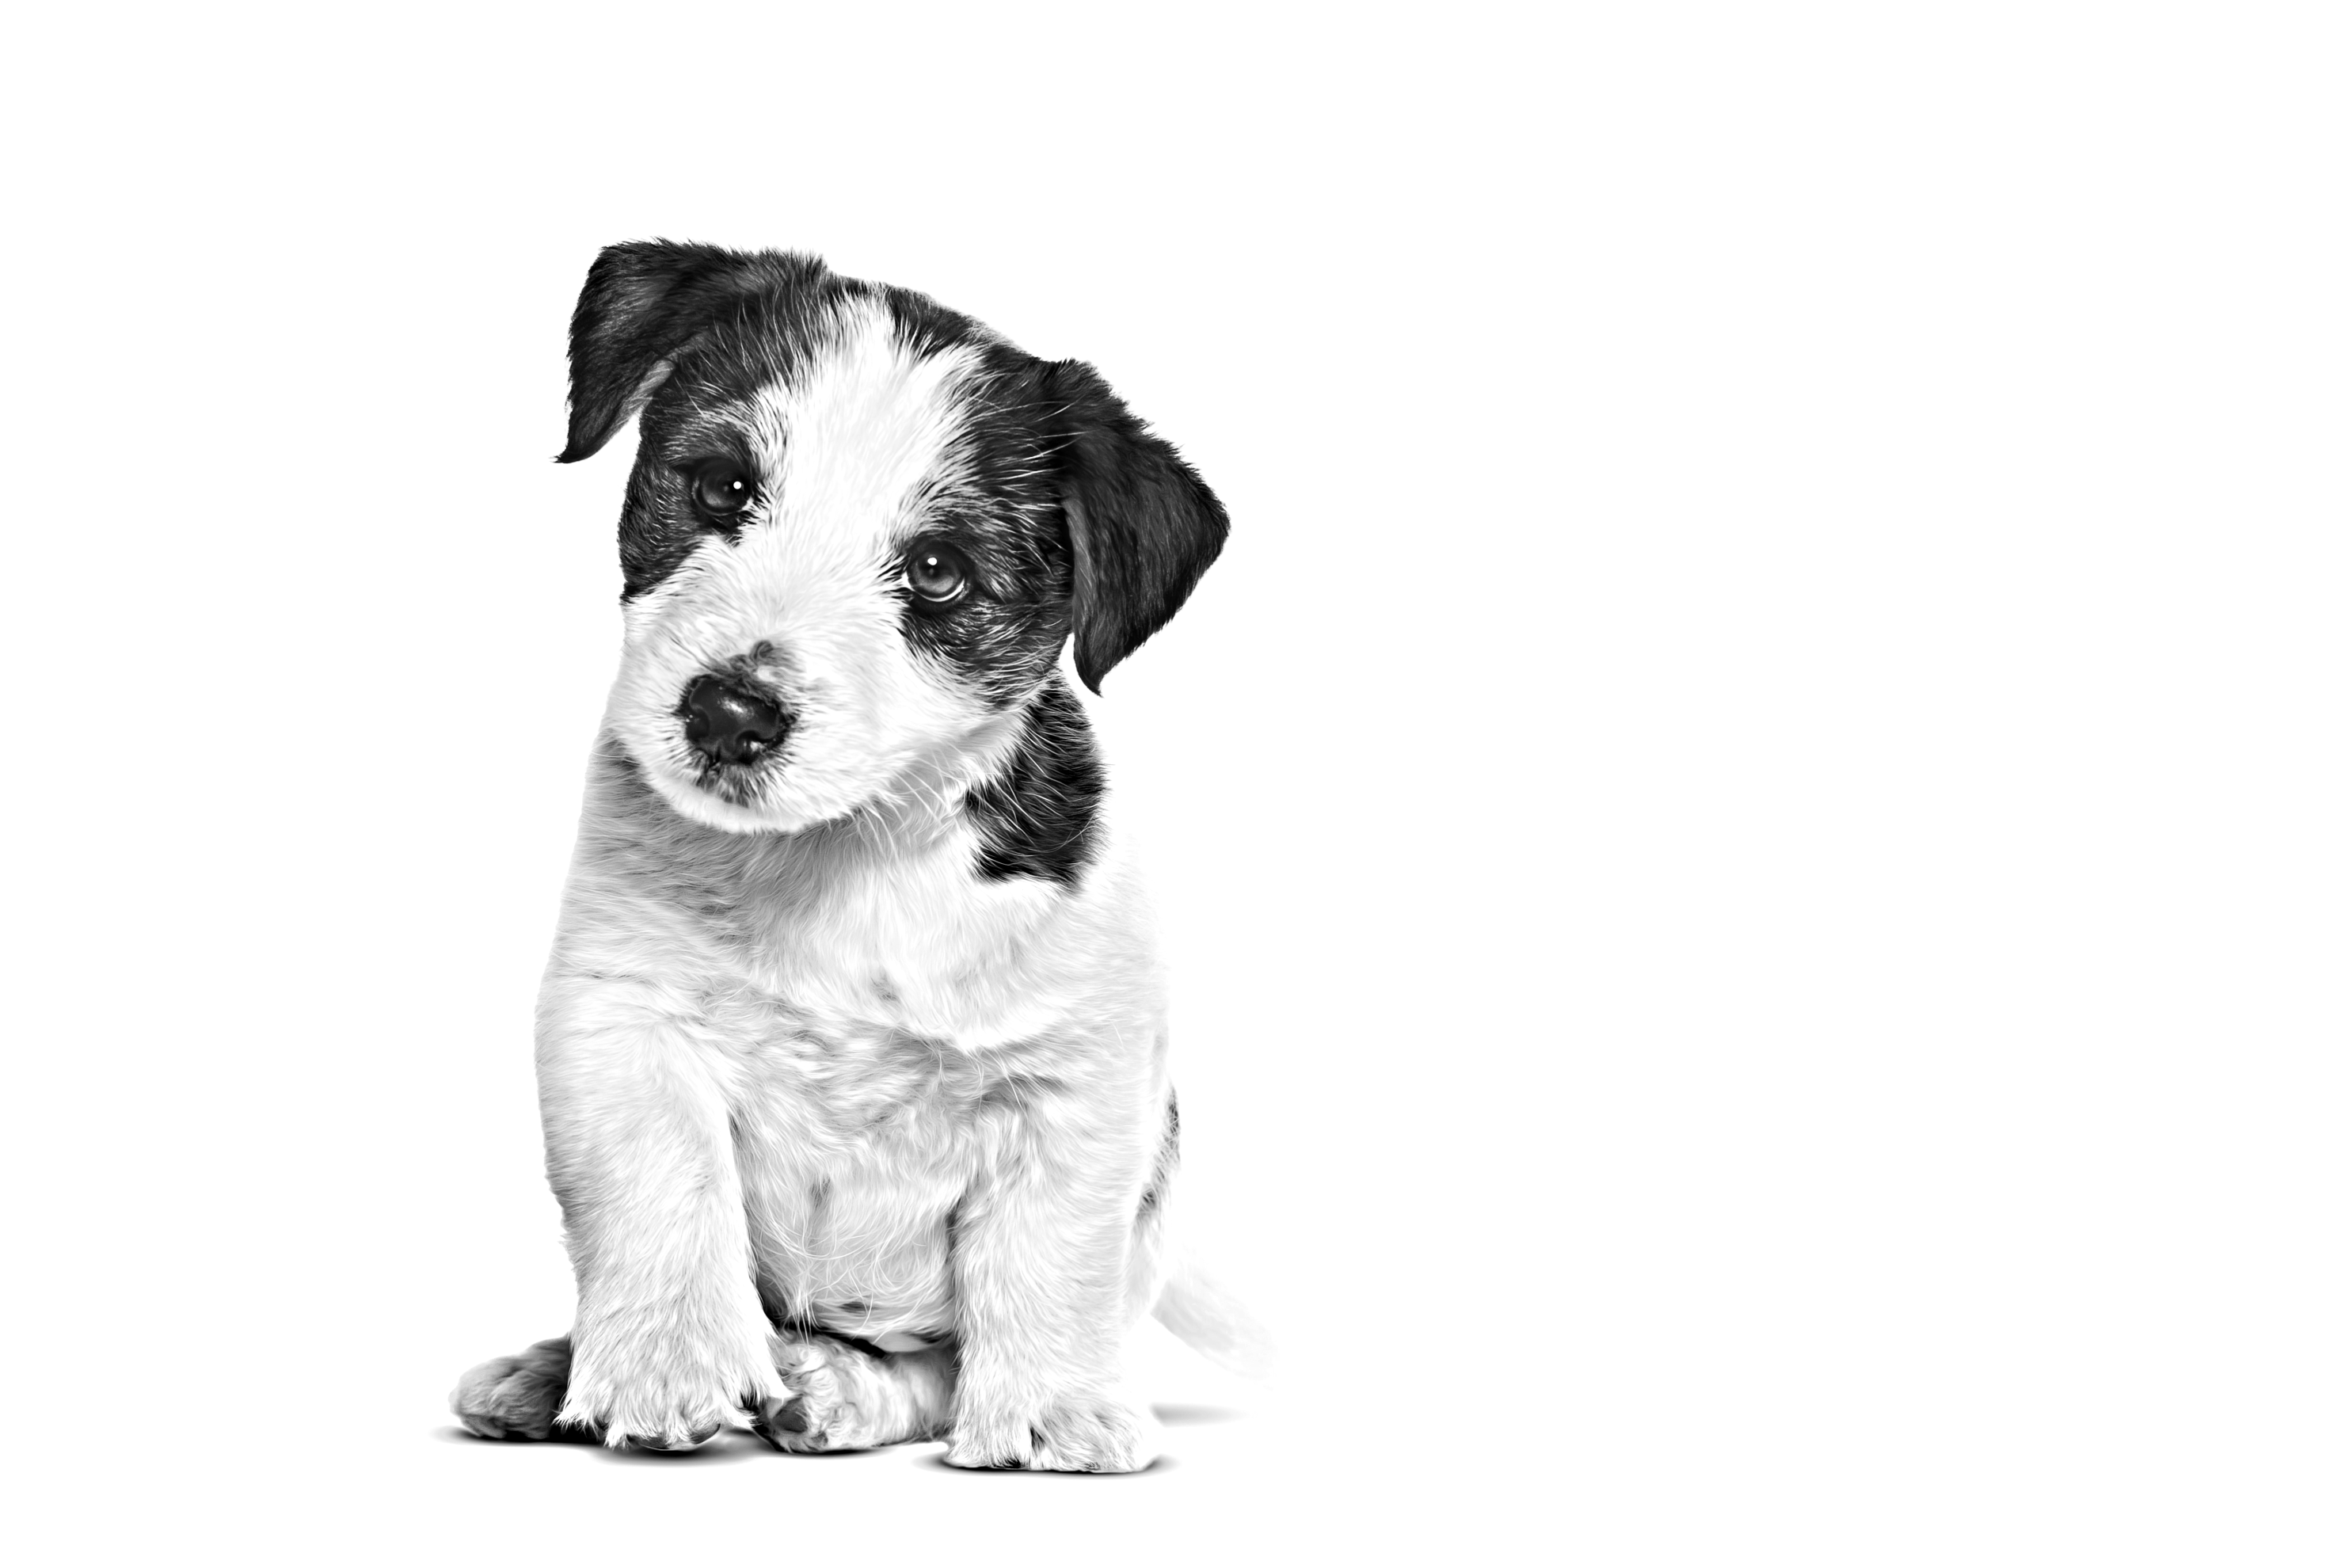 Black and white image of Jack Russel puppy sitting